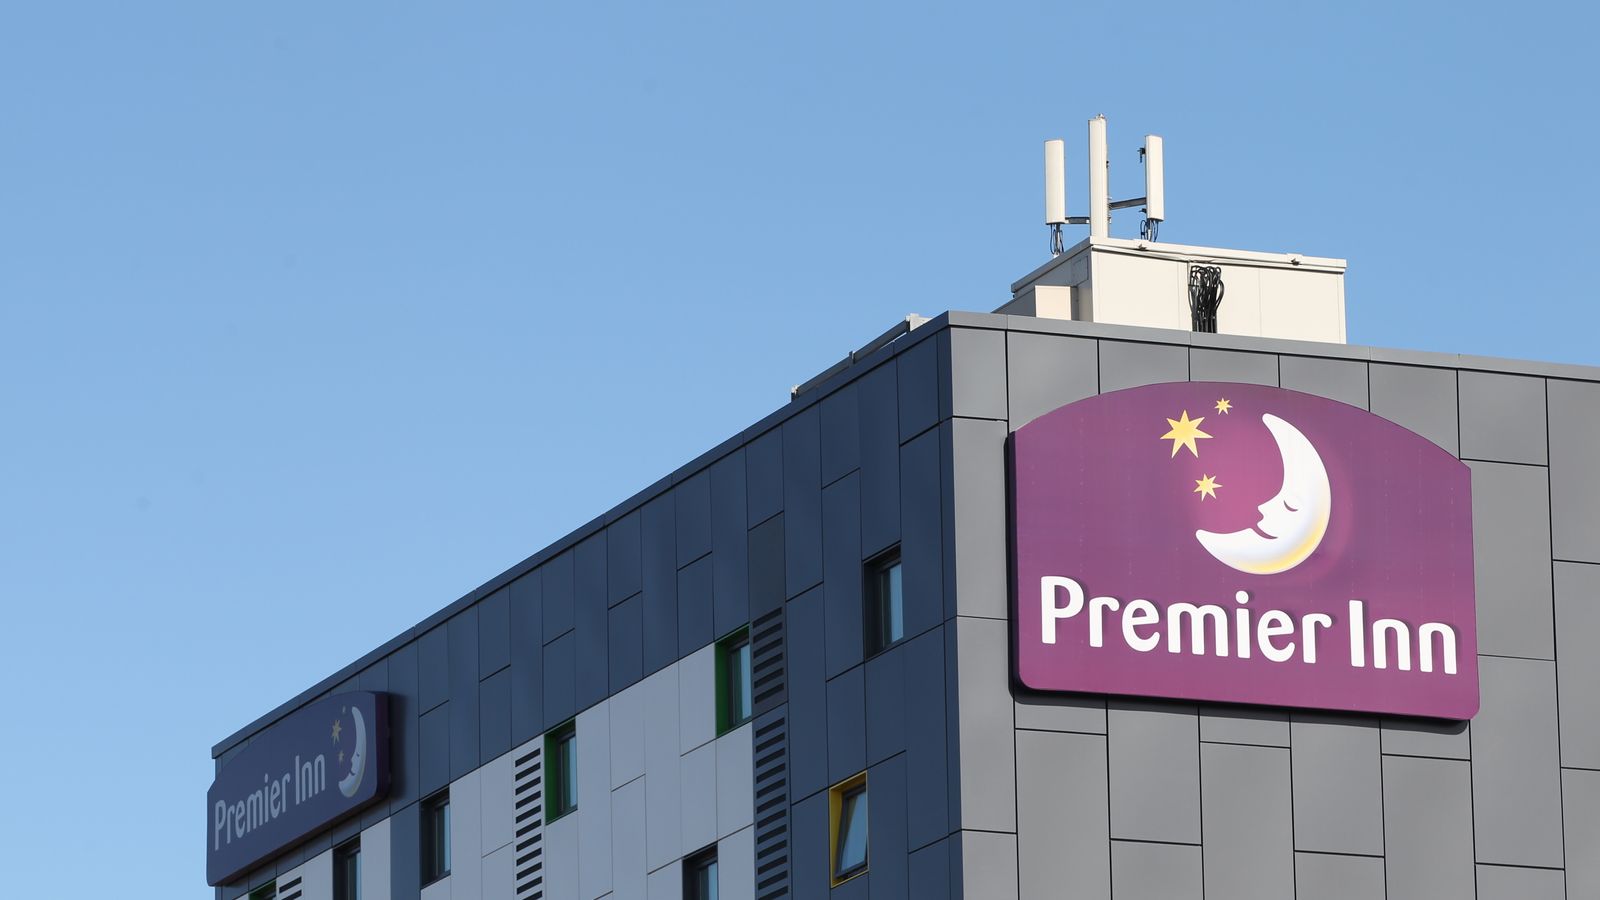 Premier Inn owner Whitbread to axe 1,500 jobs as it looks to expand hotel business